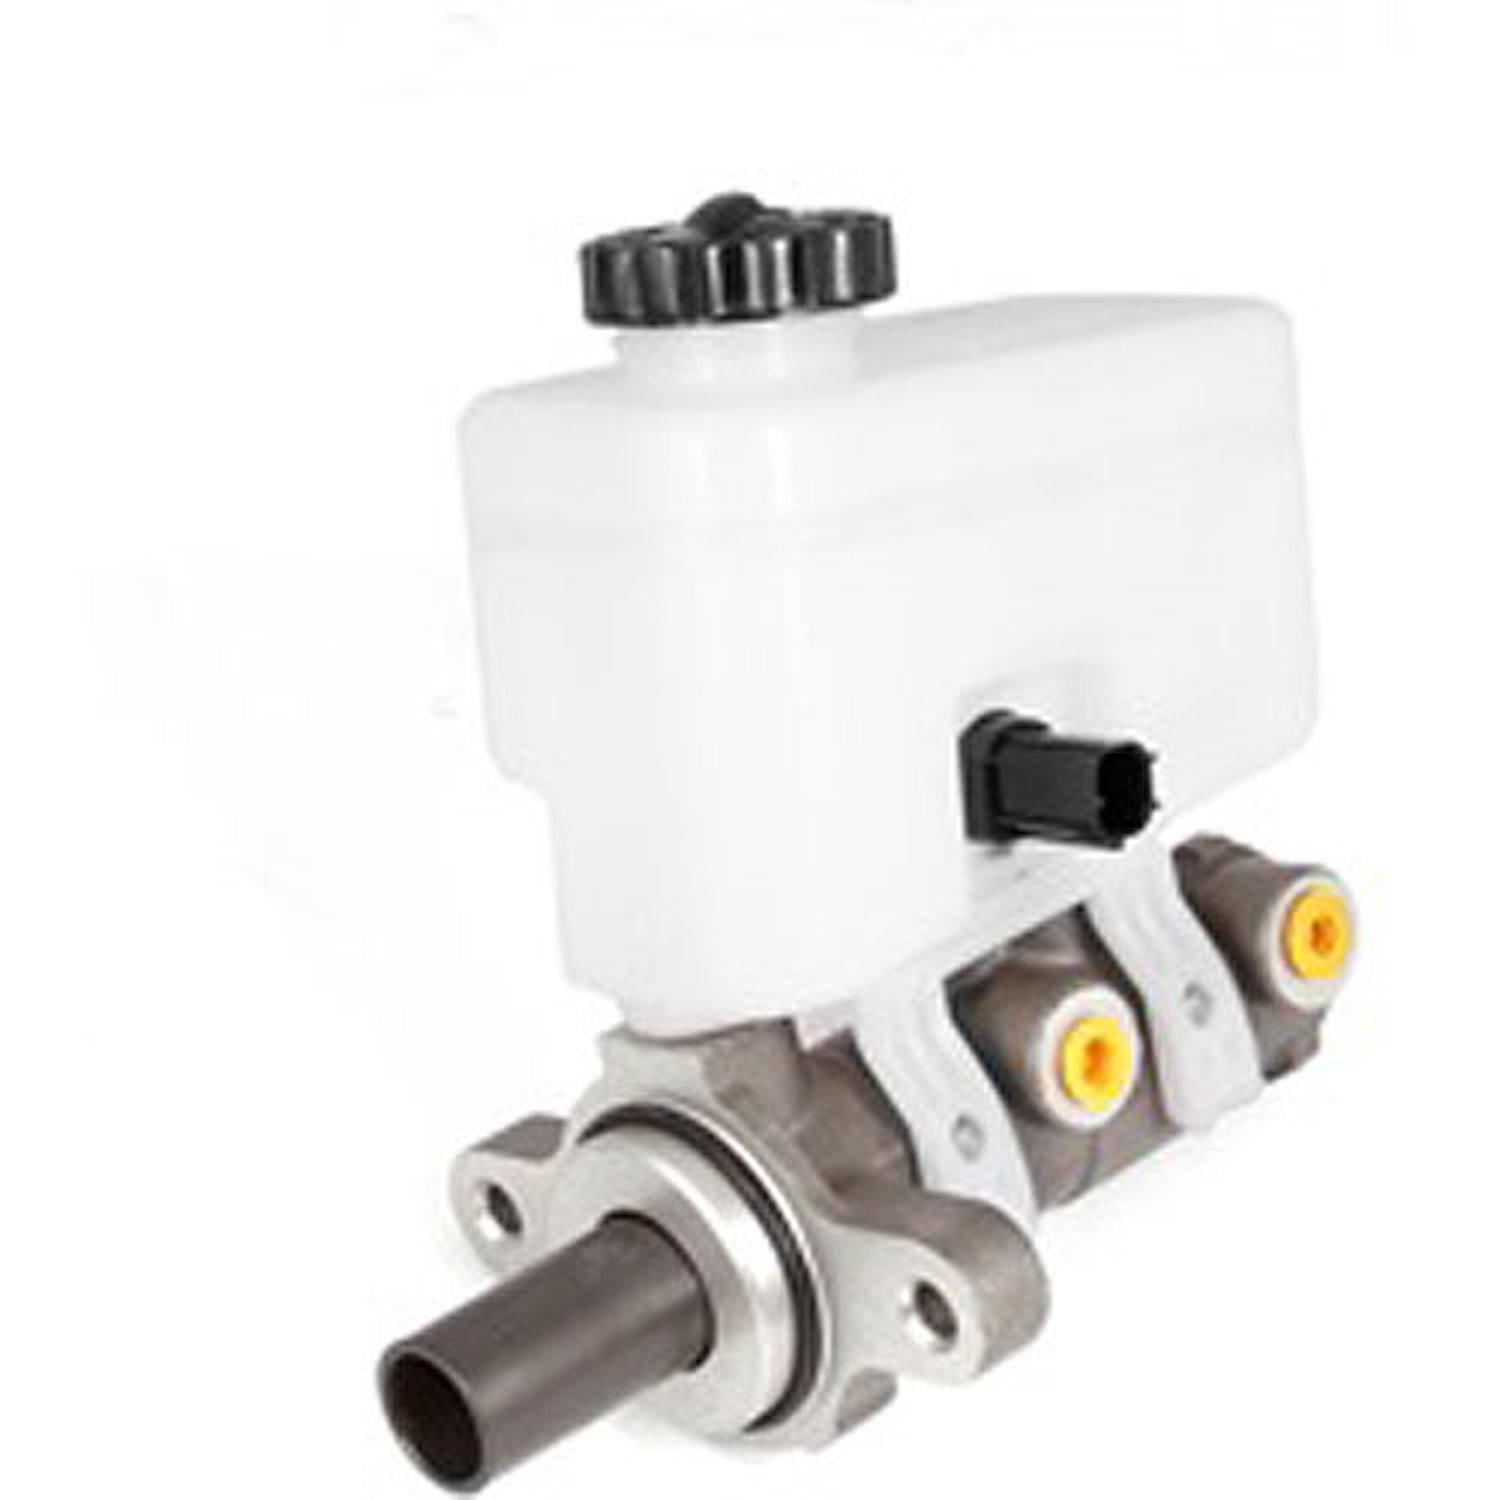 This brake master cylinder from Omix-ADA fits 07-16 Jeep Wrangler.